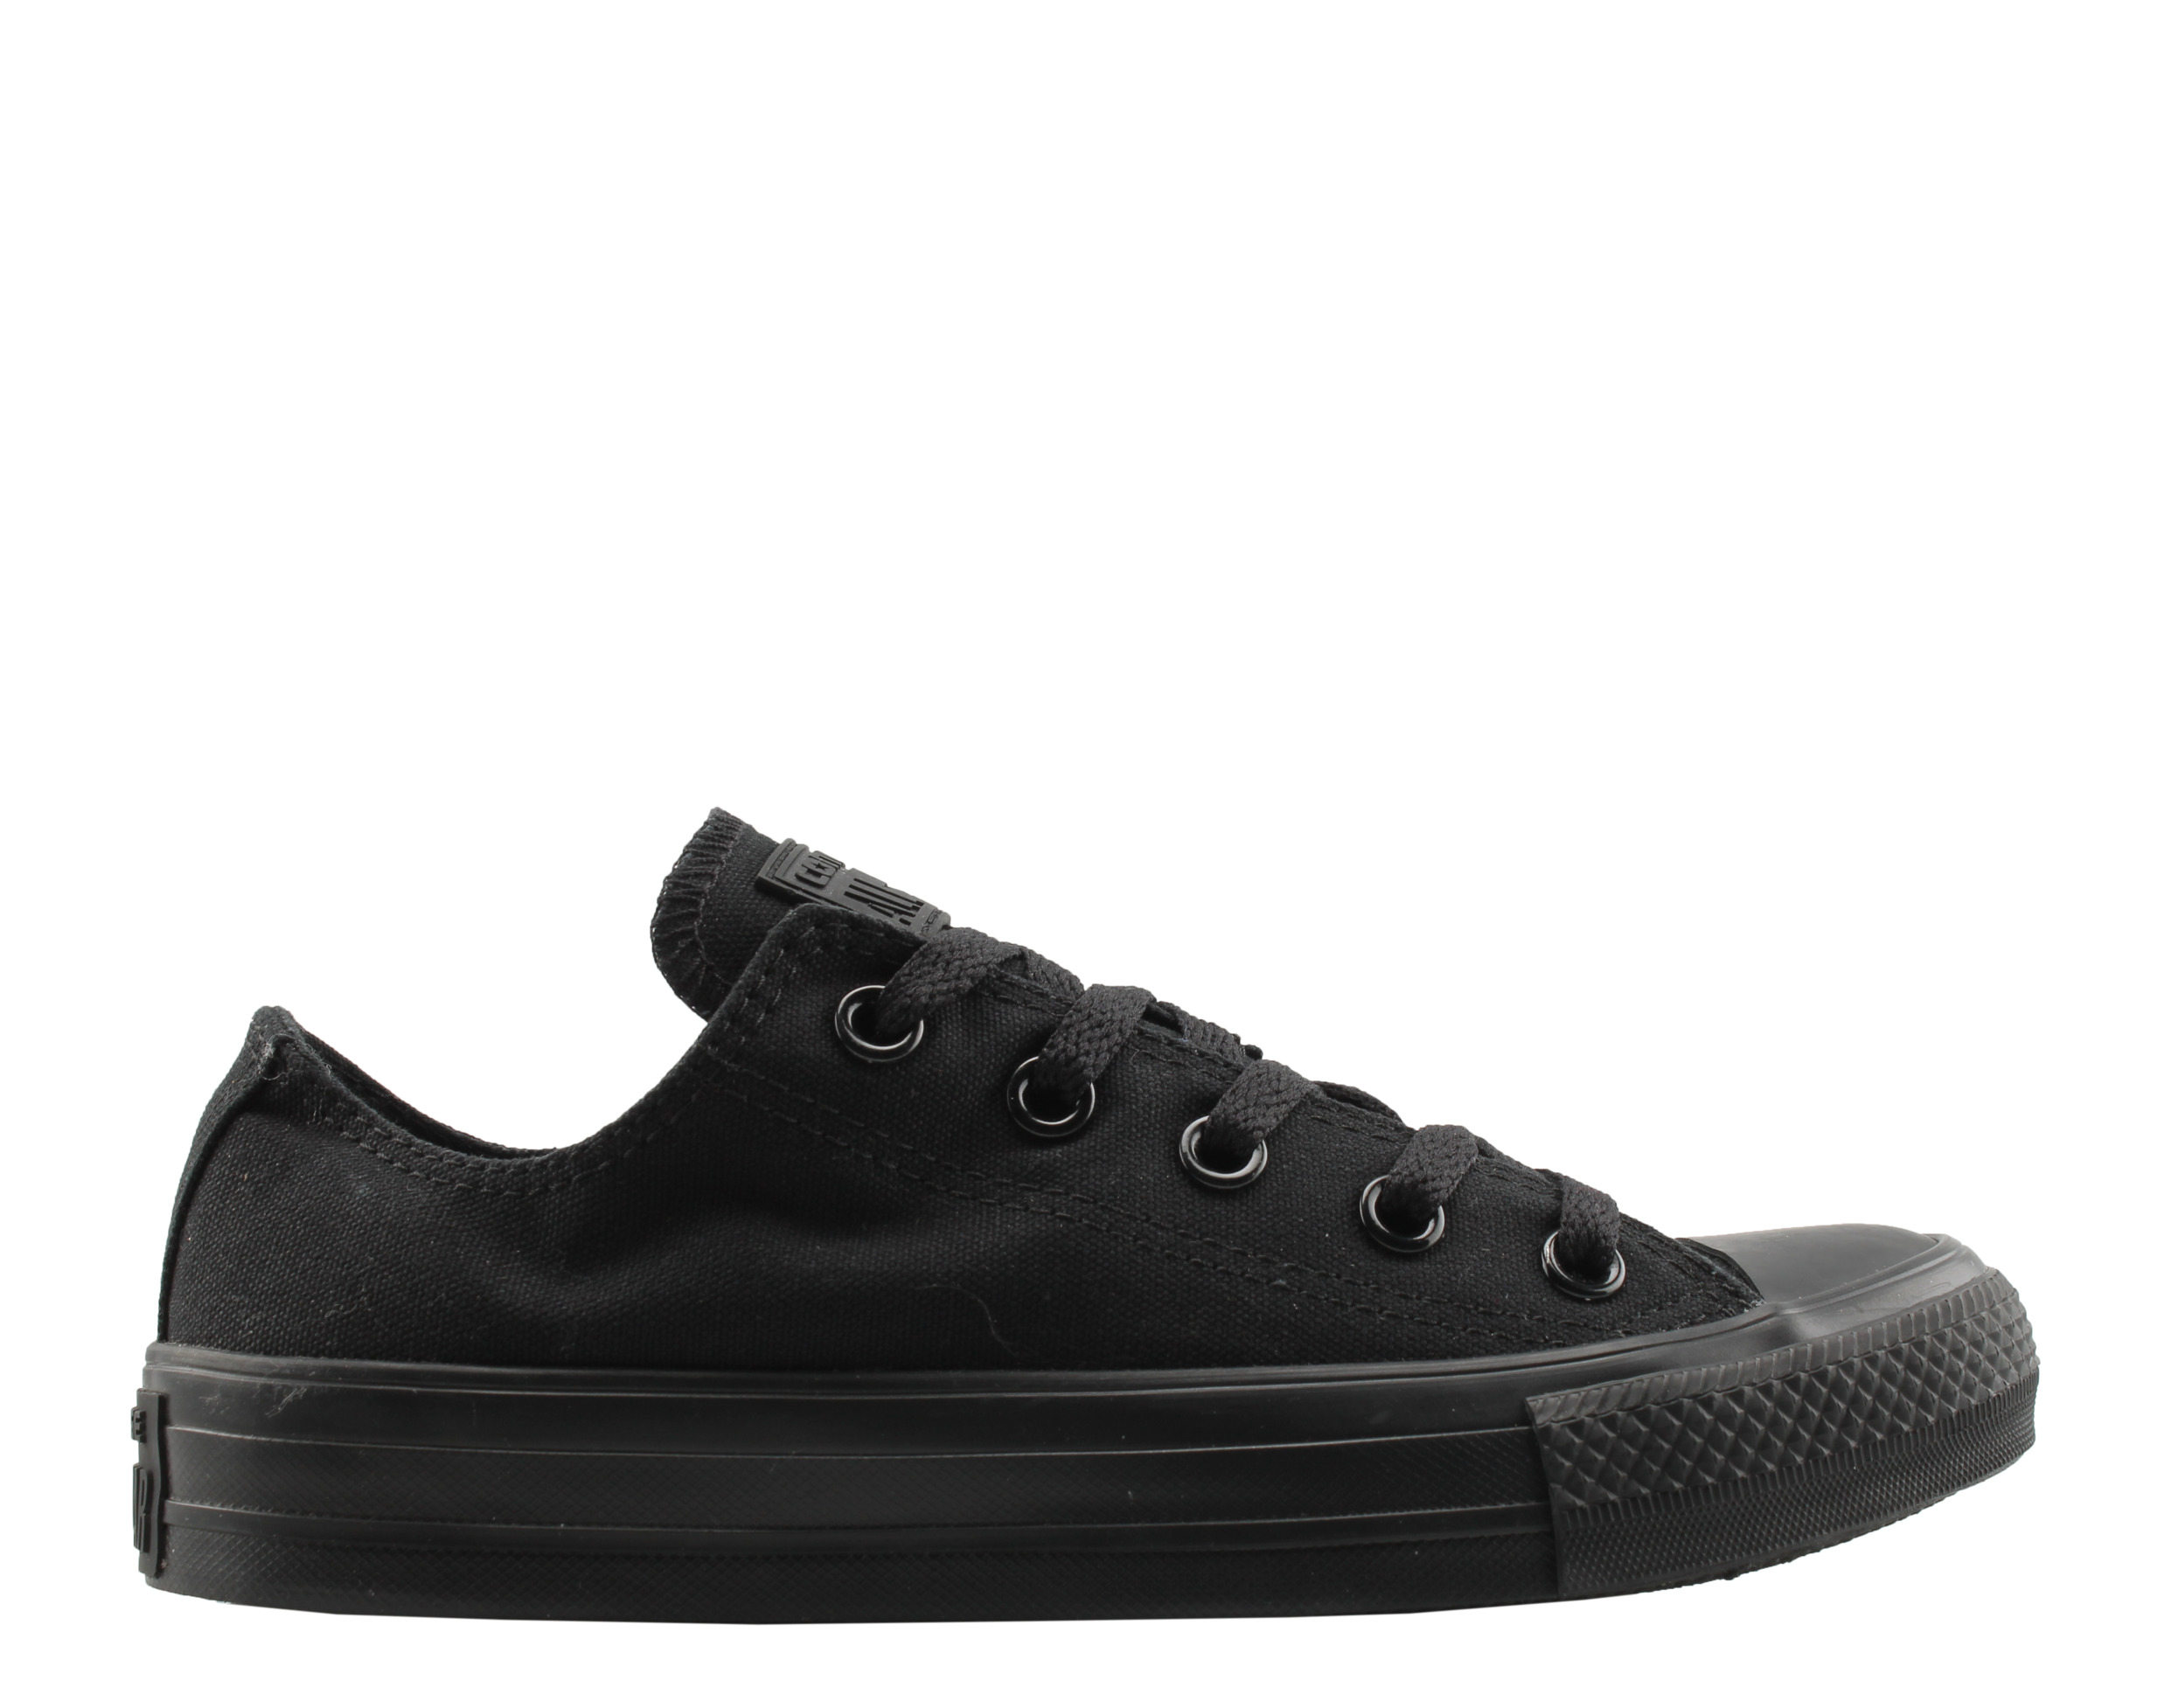 Converse Chuck Taylor All Star Low Sneaker - image 2 of 6